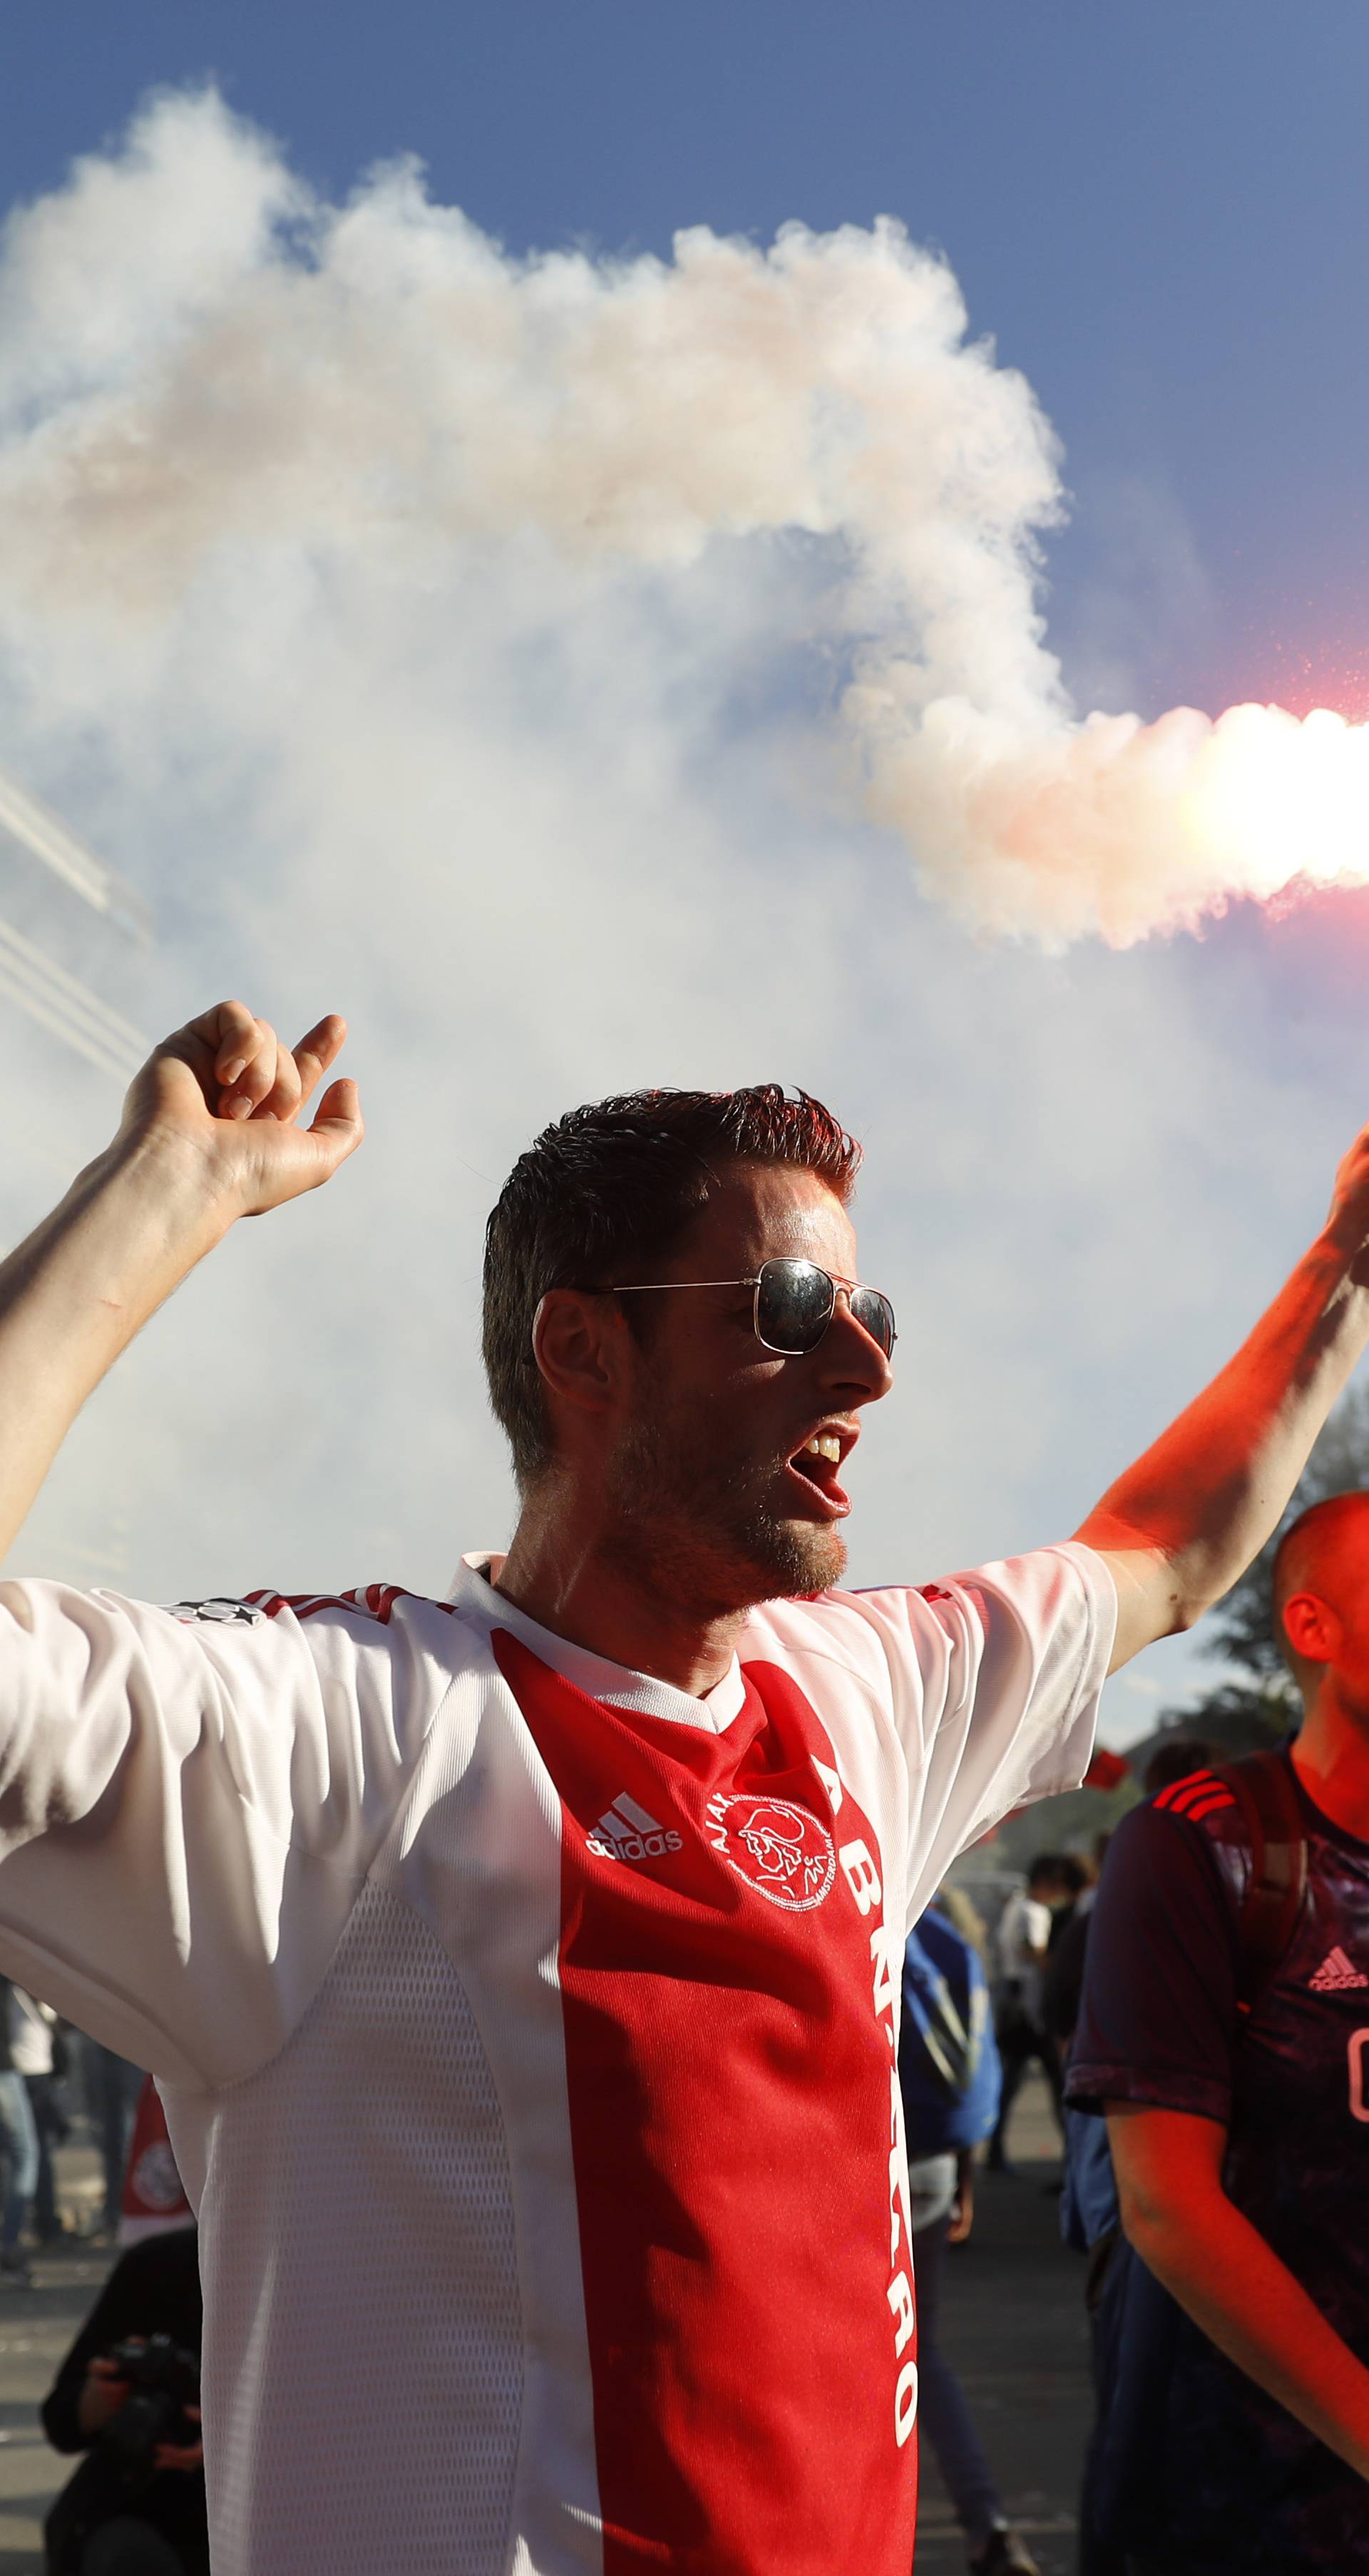 Ajax fan with a flare outside the stadium before the match